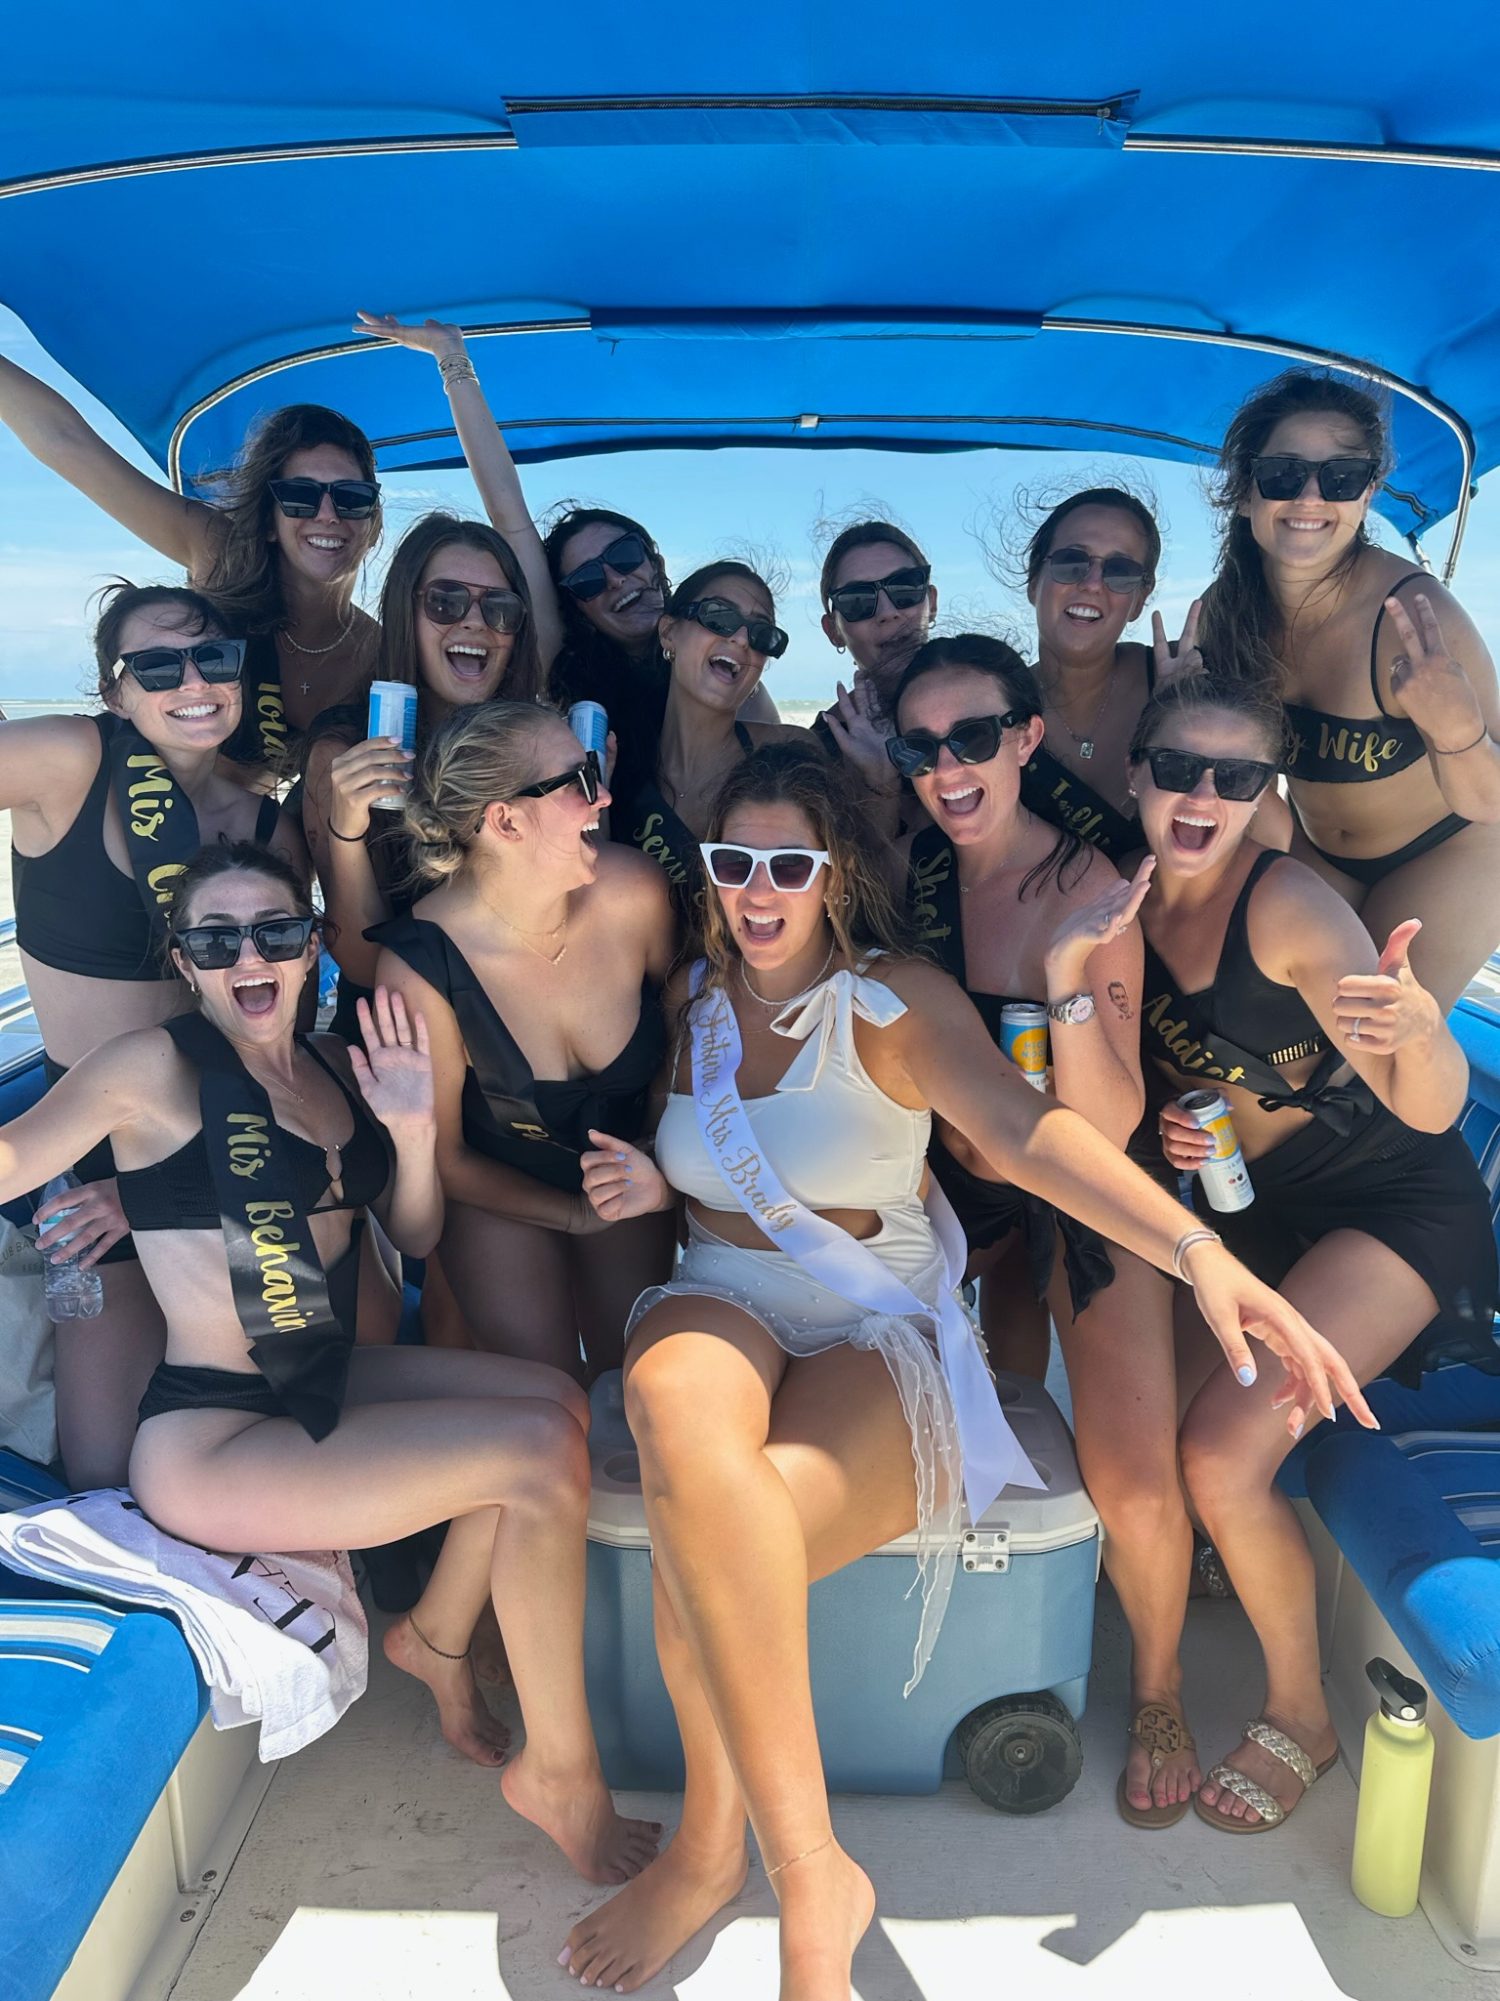 13 girls on a pontoon boat in matching black bathing suits and srongs. 